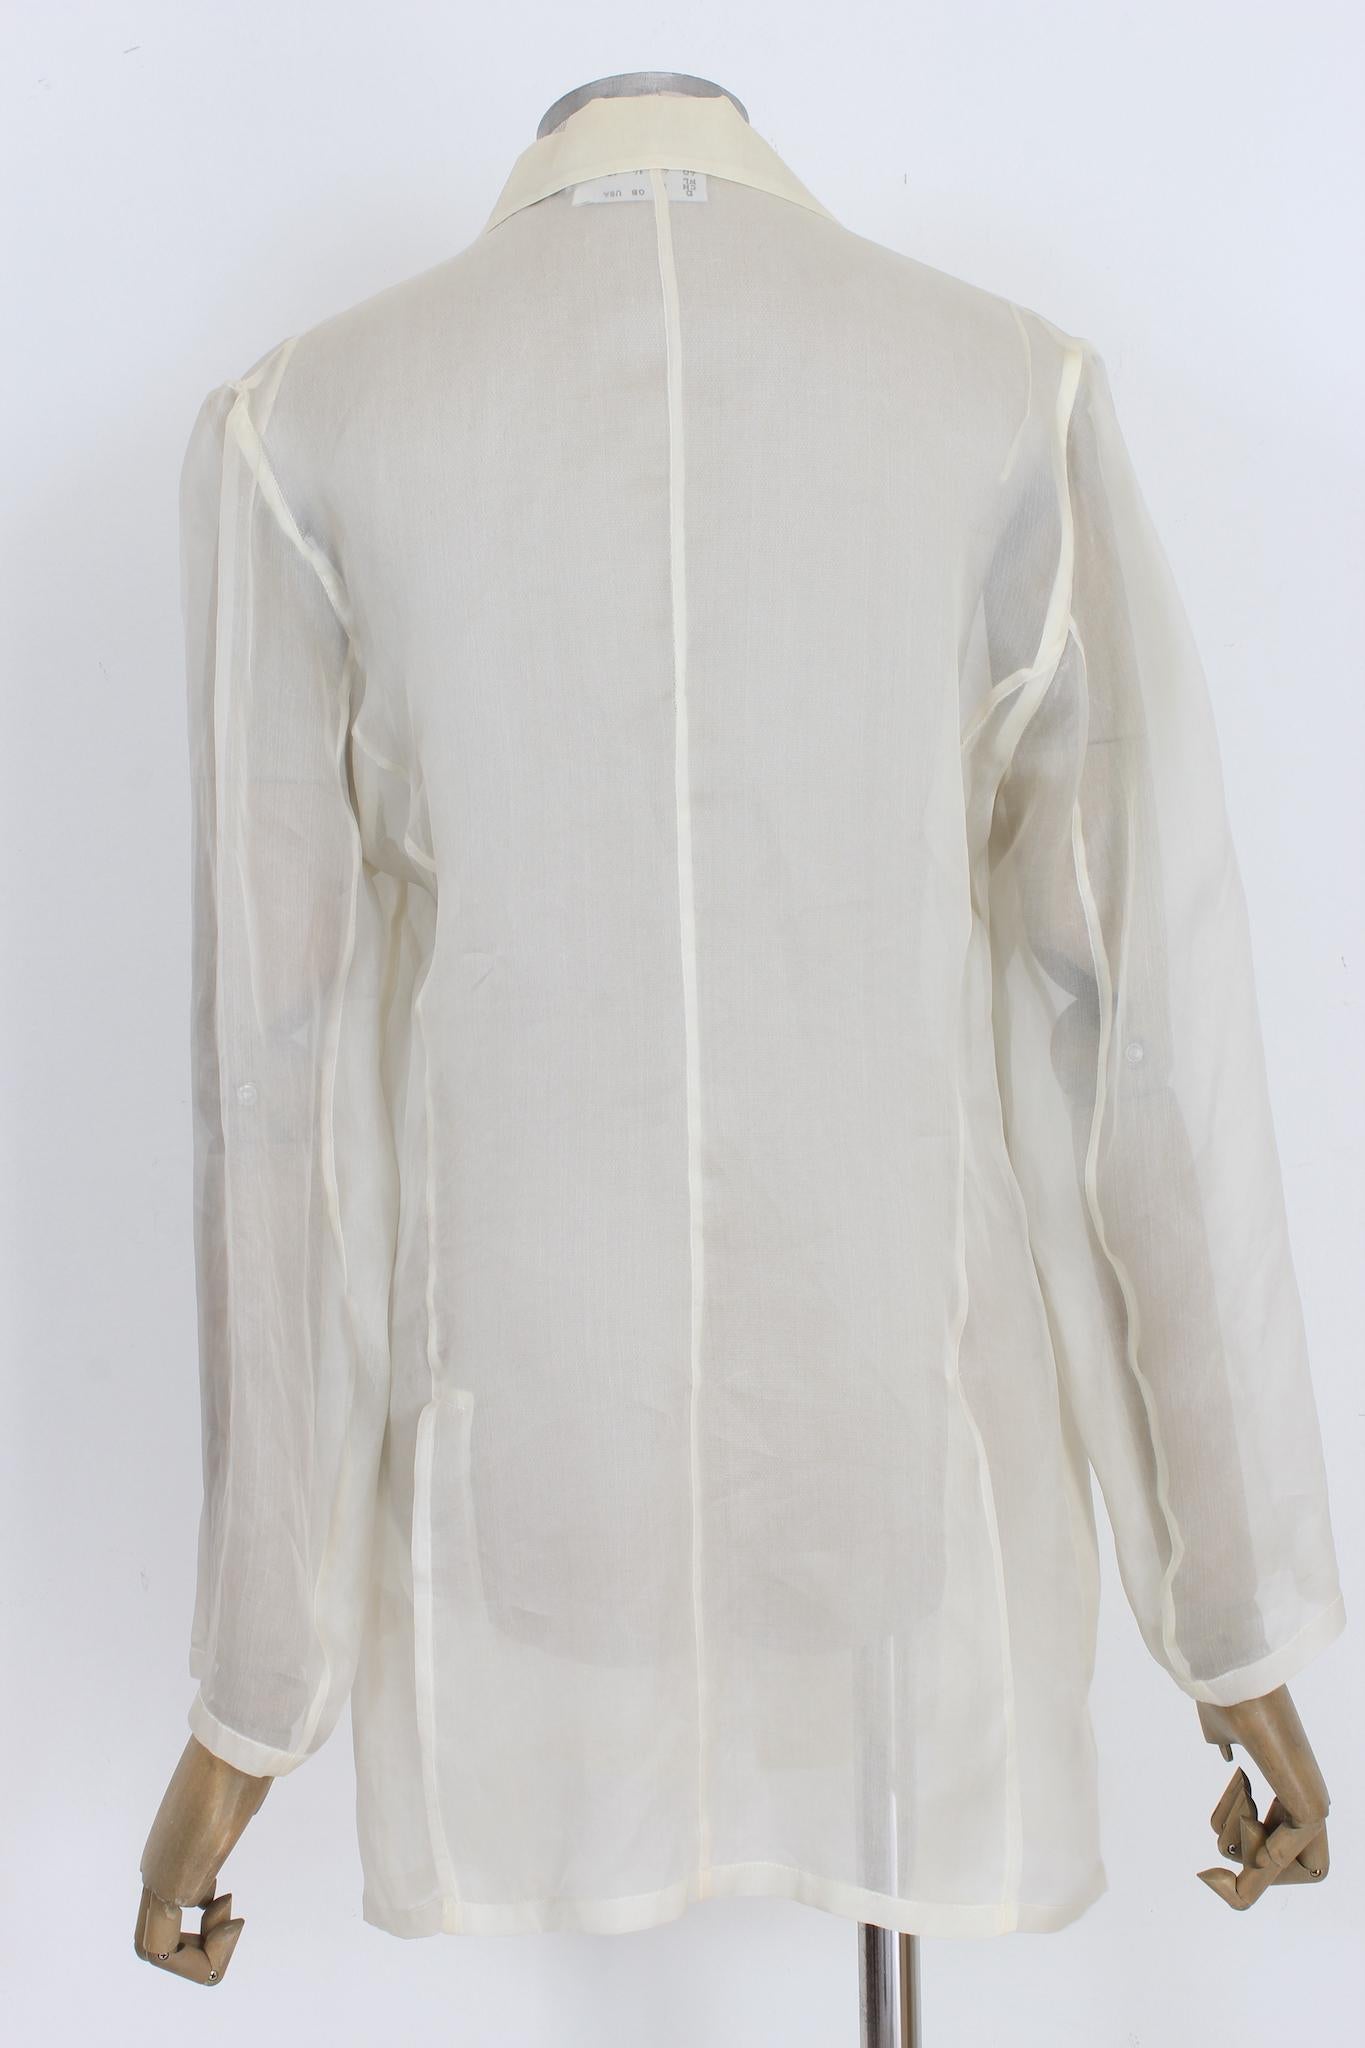 Max Mara vintage 90s evening jacket. Soft overcoat in elegant transparent white color, mother-of-pearl button closure. Two large hip pockets. 100% silk fabric. Made in Italy.

Size: 44 It 10 Us 12 Uk

Shoulder: 44 cm
Bust/Chest: 50 cm
Sleeve: 58